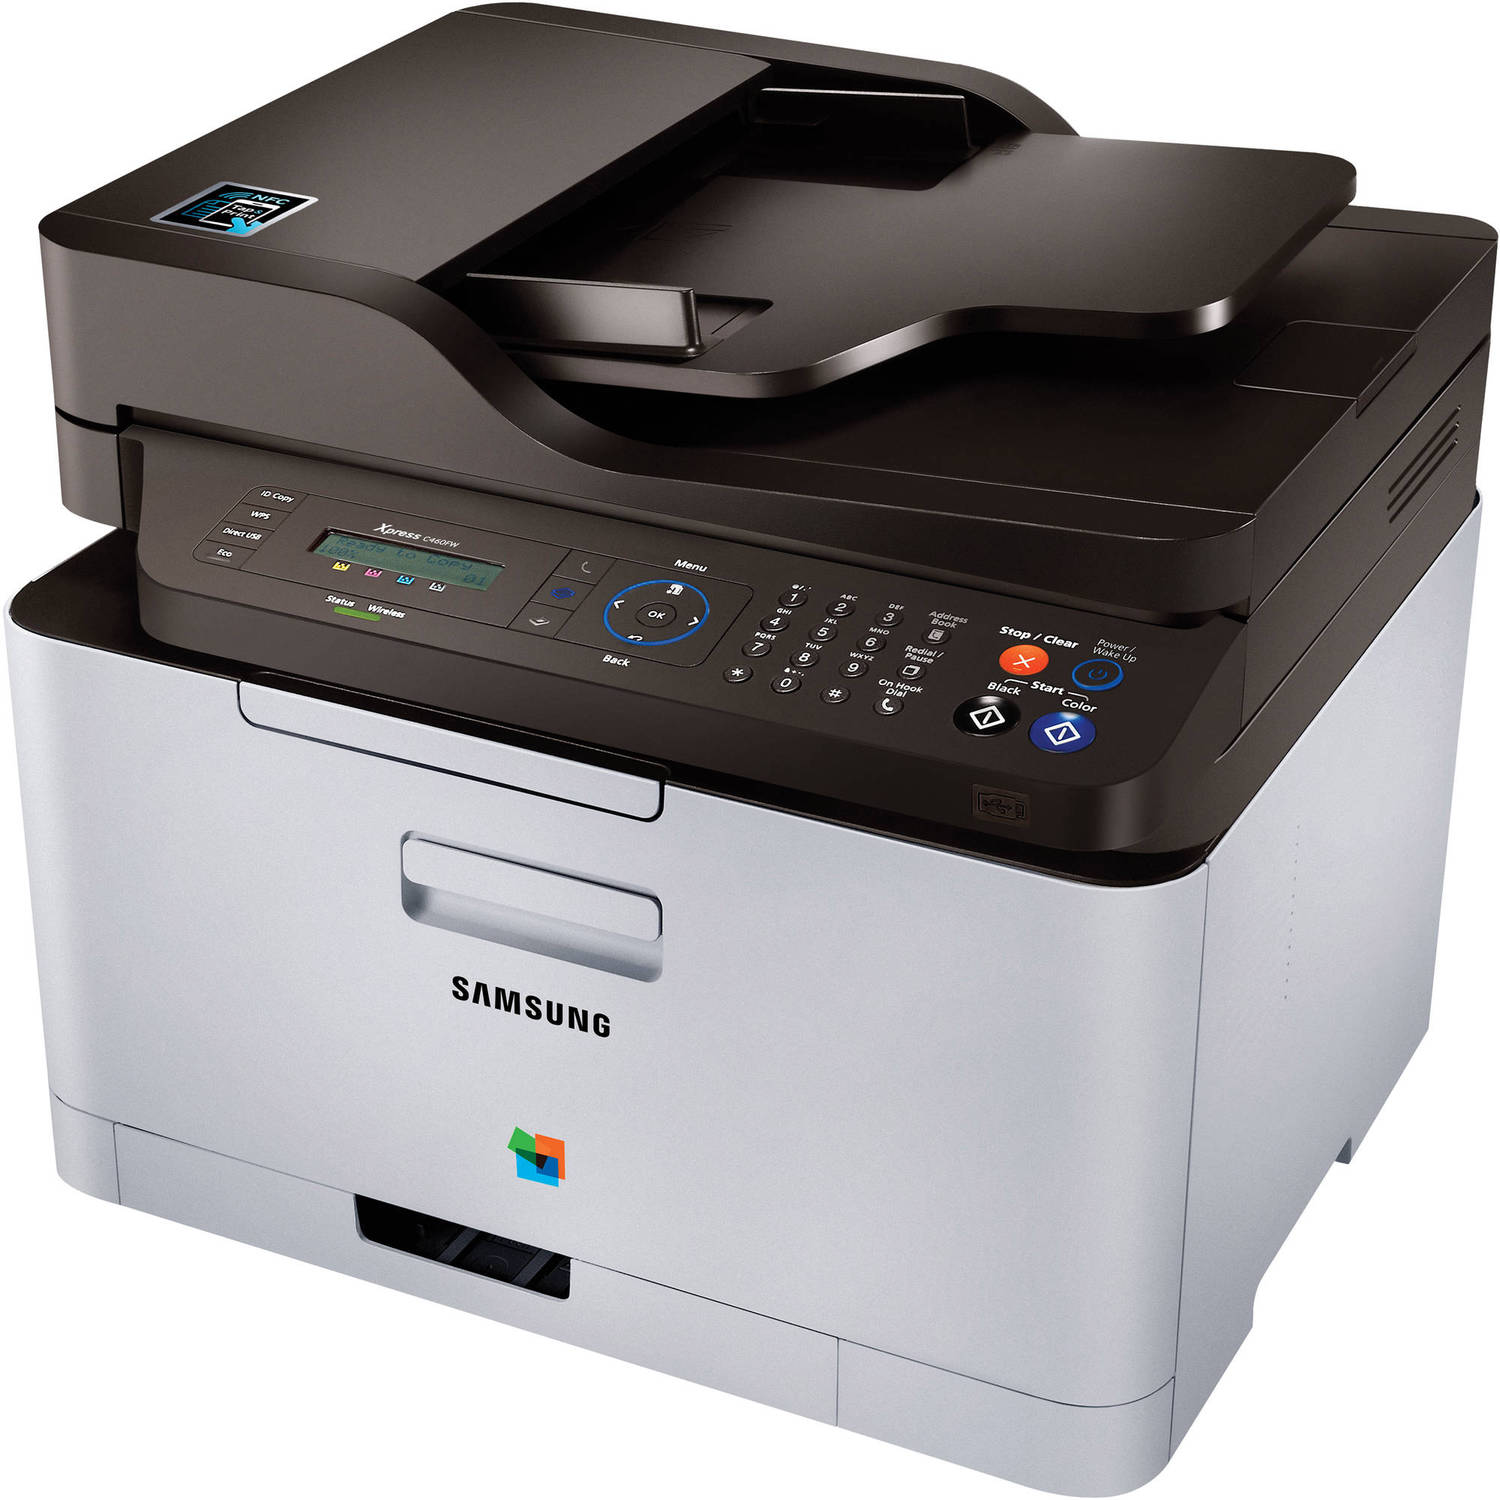 Samsung SLC460FW/XAA Wireless Color Printer With Scanner, Copier And Fax - Samsung Parts USA